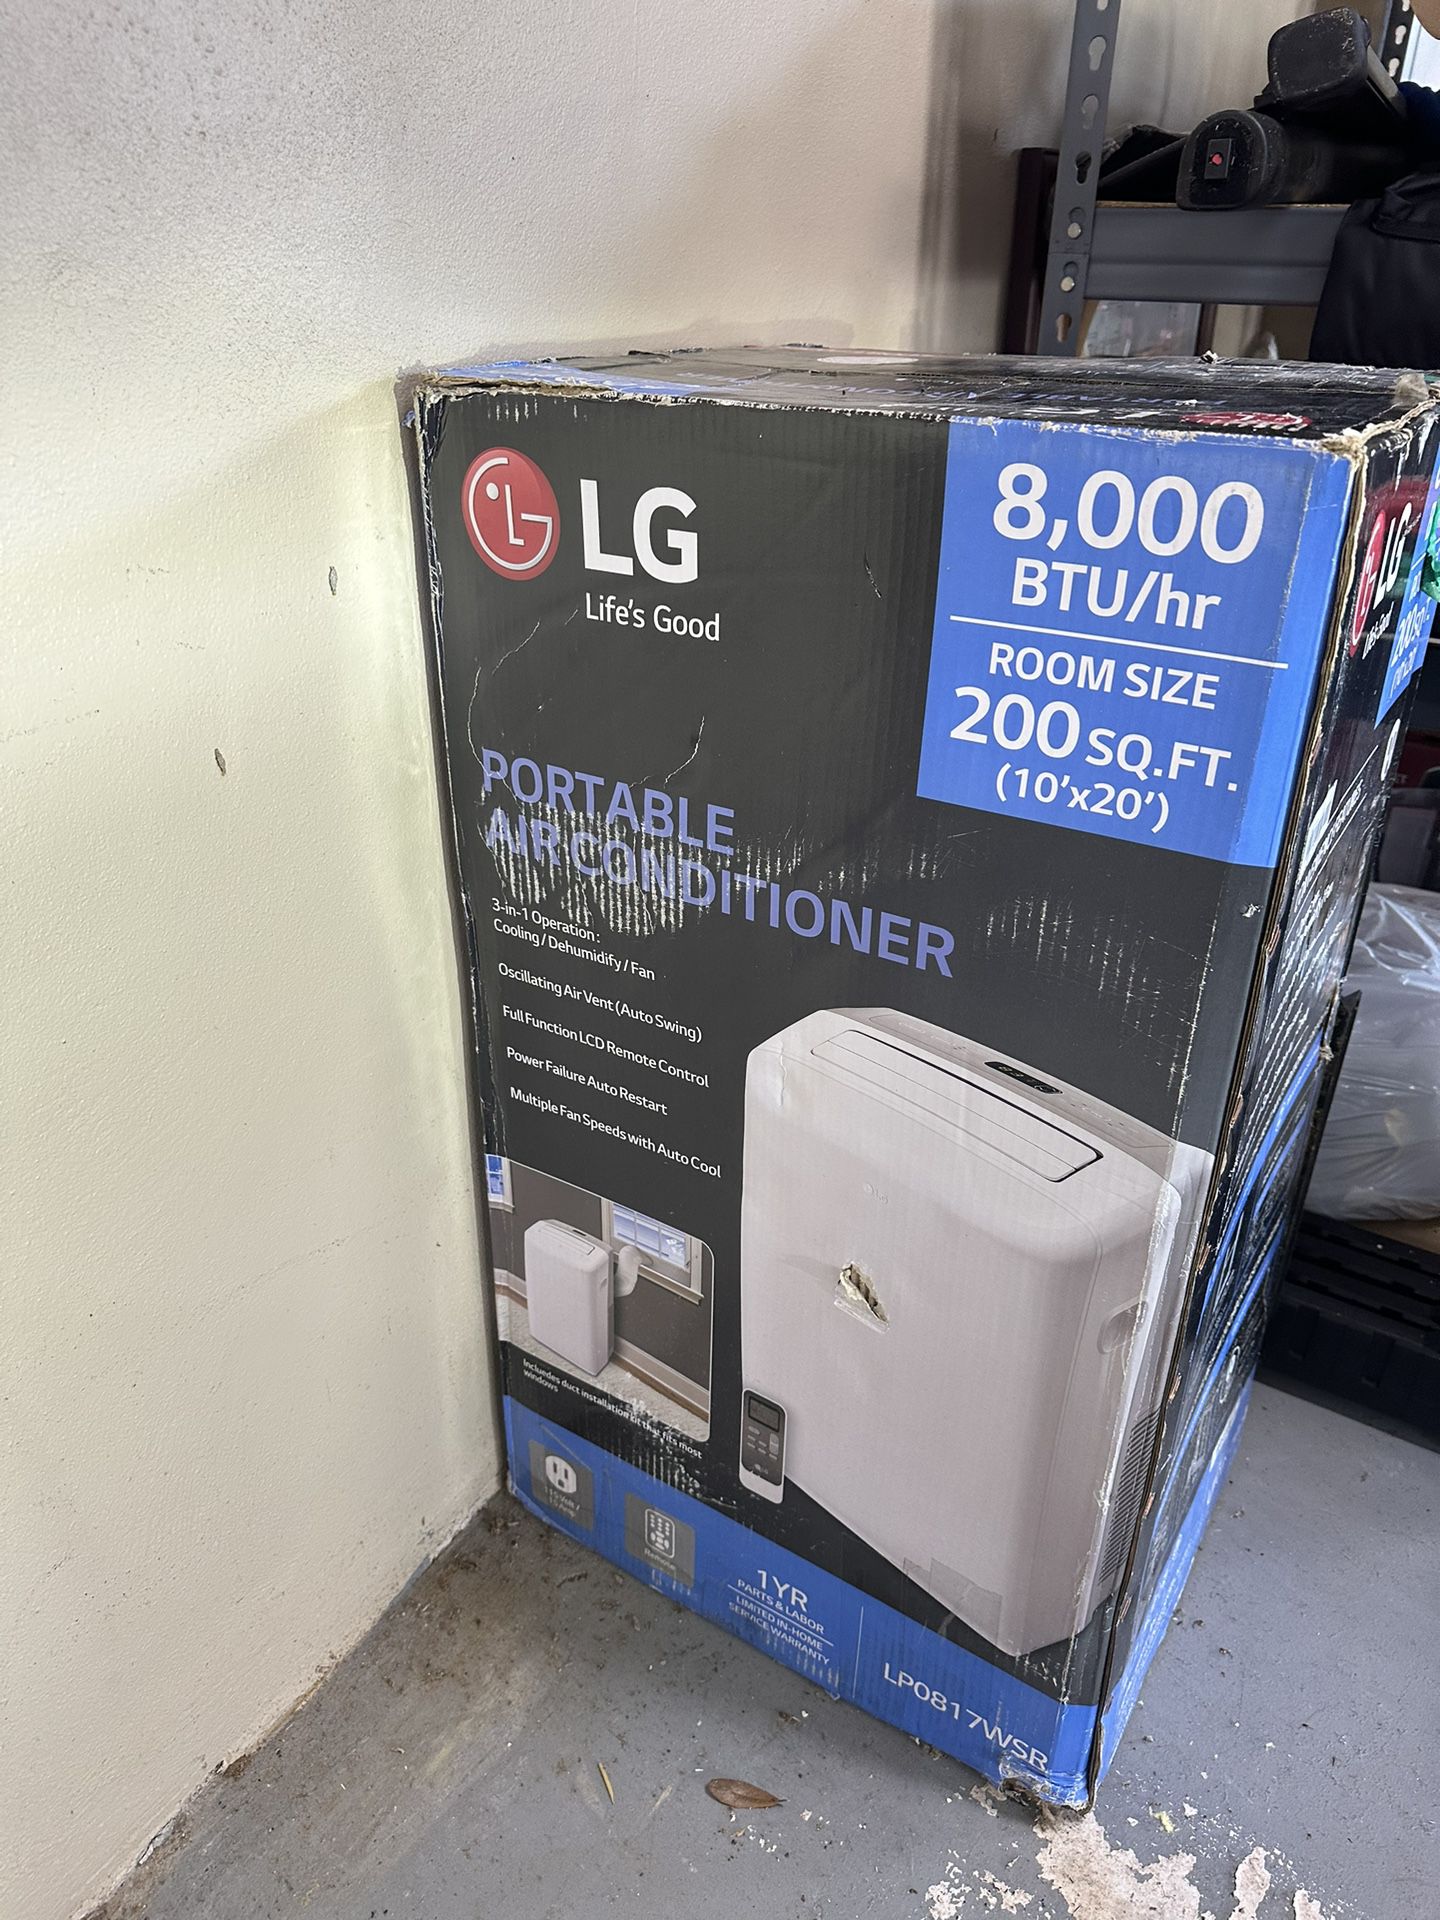 Brand New LG AC Unit.  Never Used Still In Box